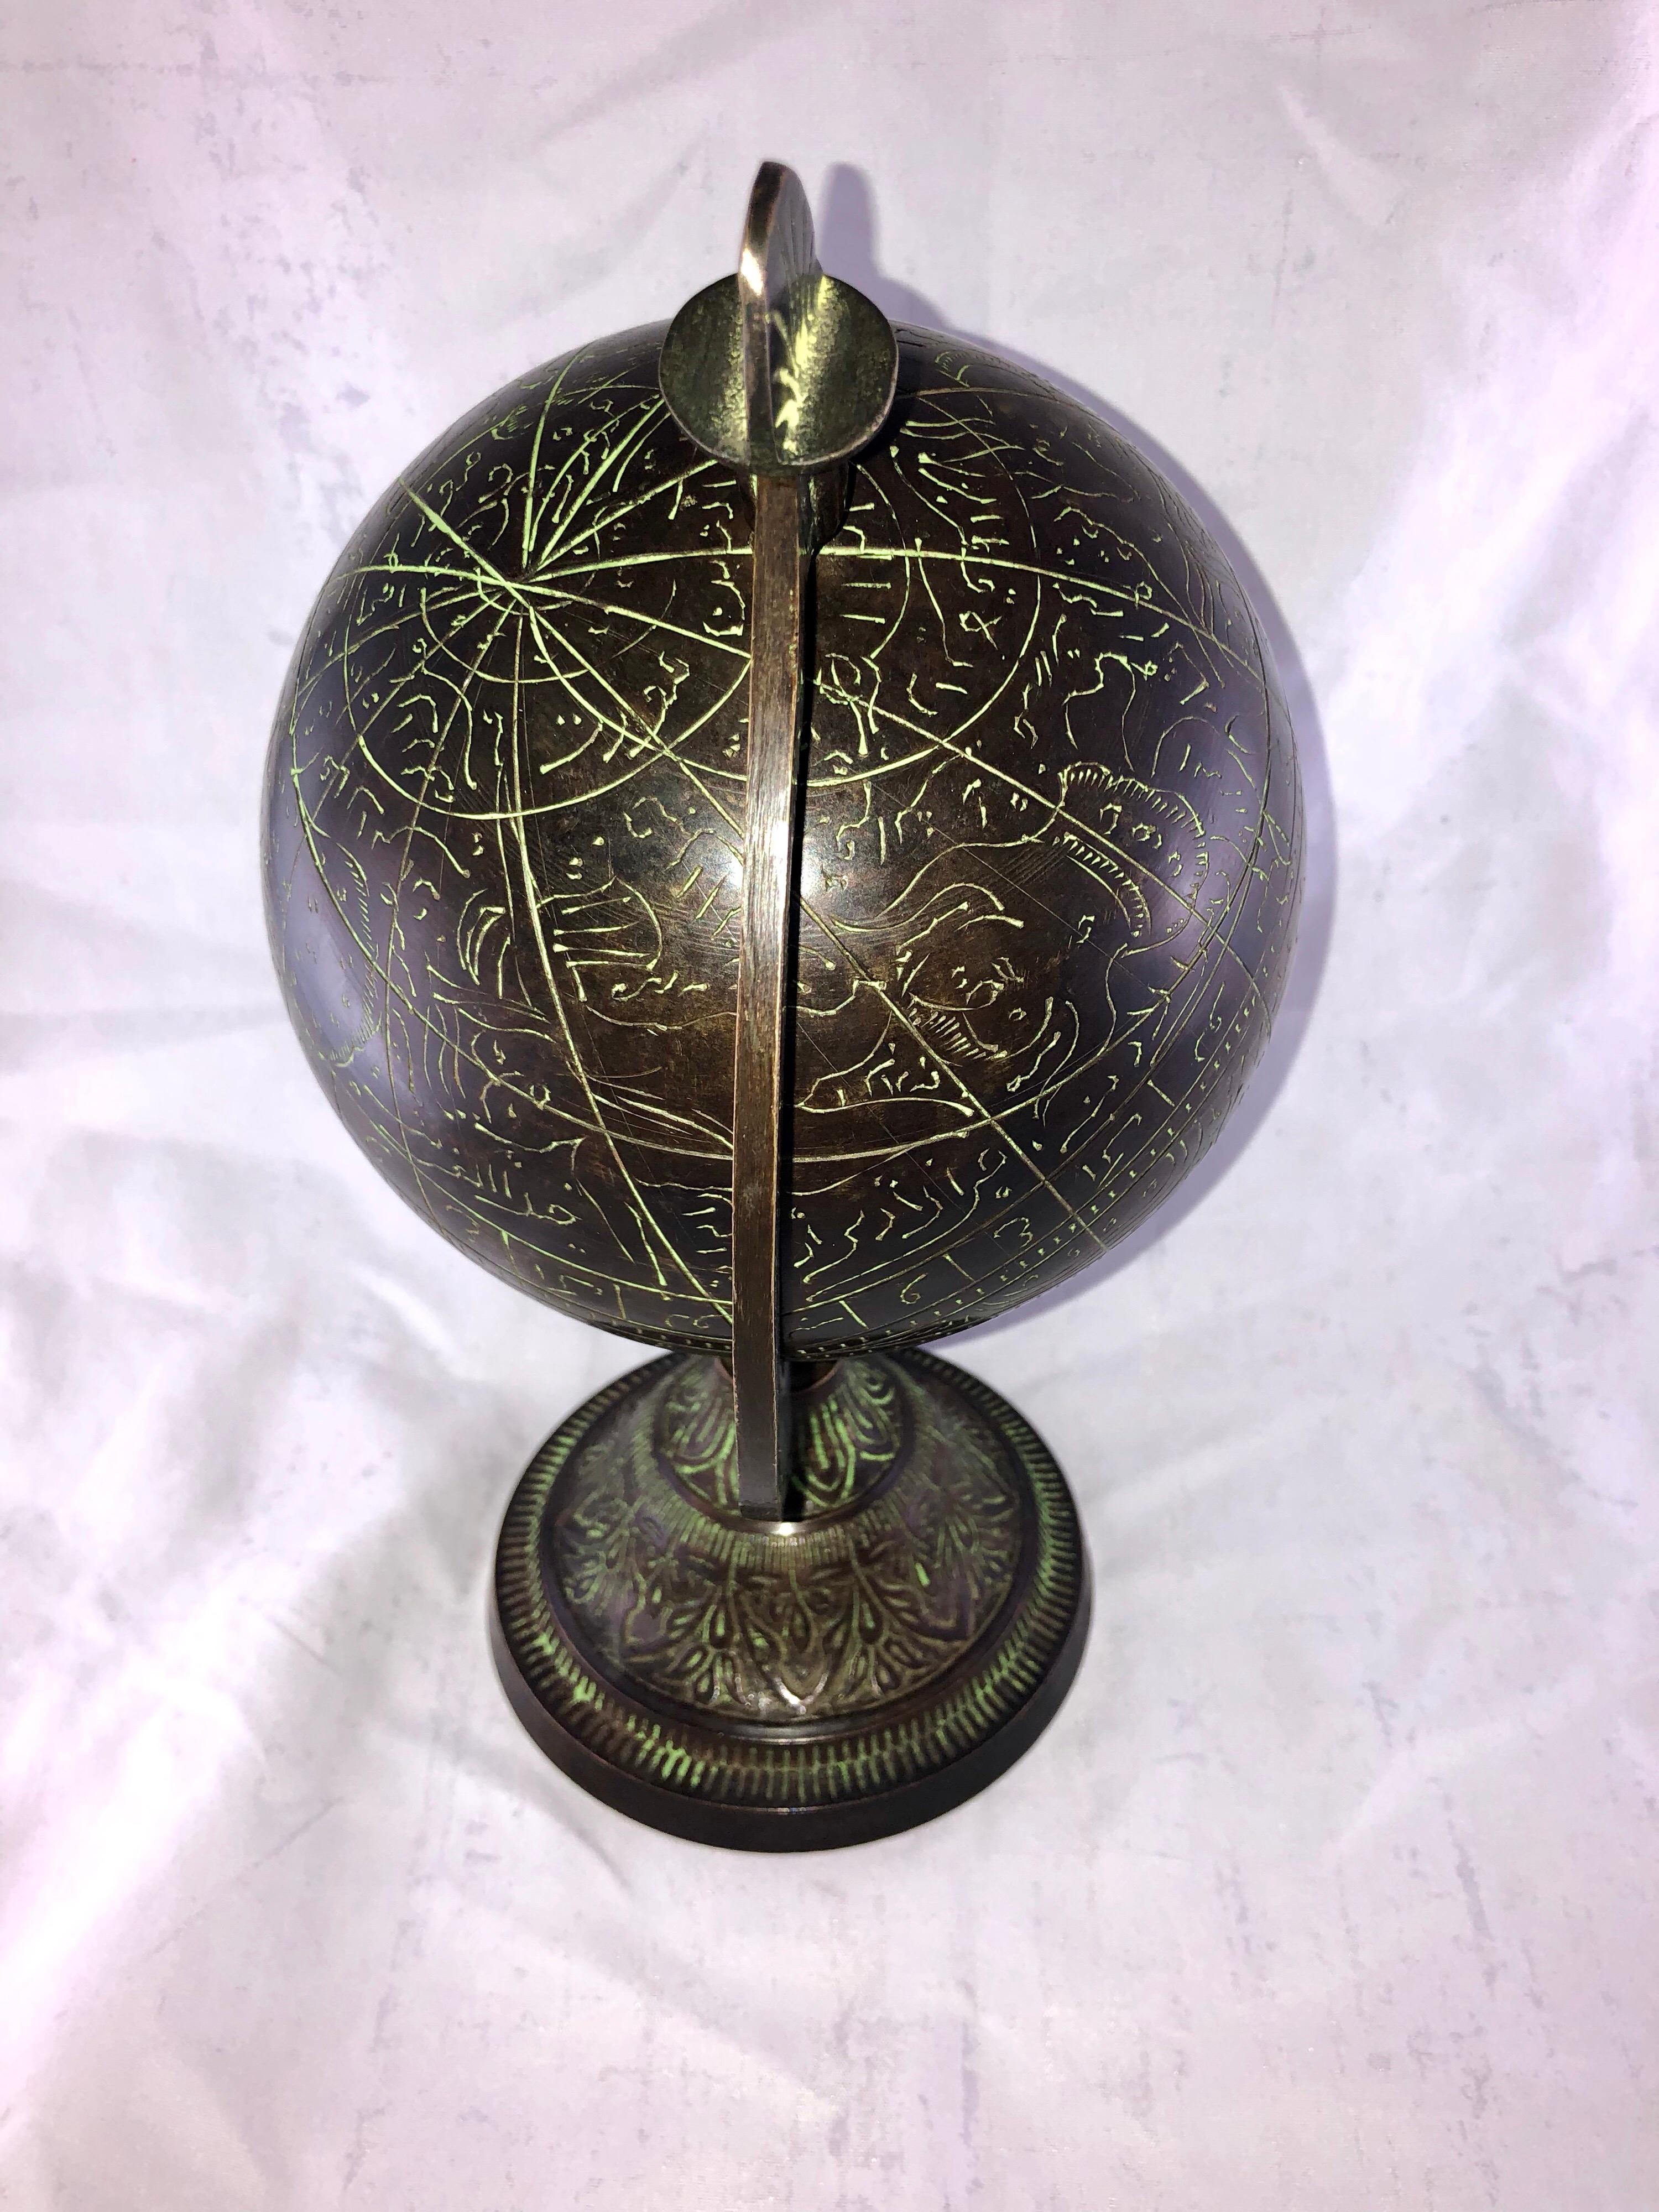 This antique Islamic Bronze Celestial Globe is a truly unique find, discovered in the ruins of an old Jewish kasbah in southern Morocco, along with other bronze items from the same era. While the date is approximate, a similar celestial globe in the